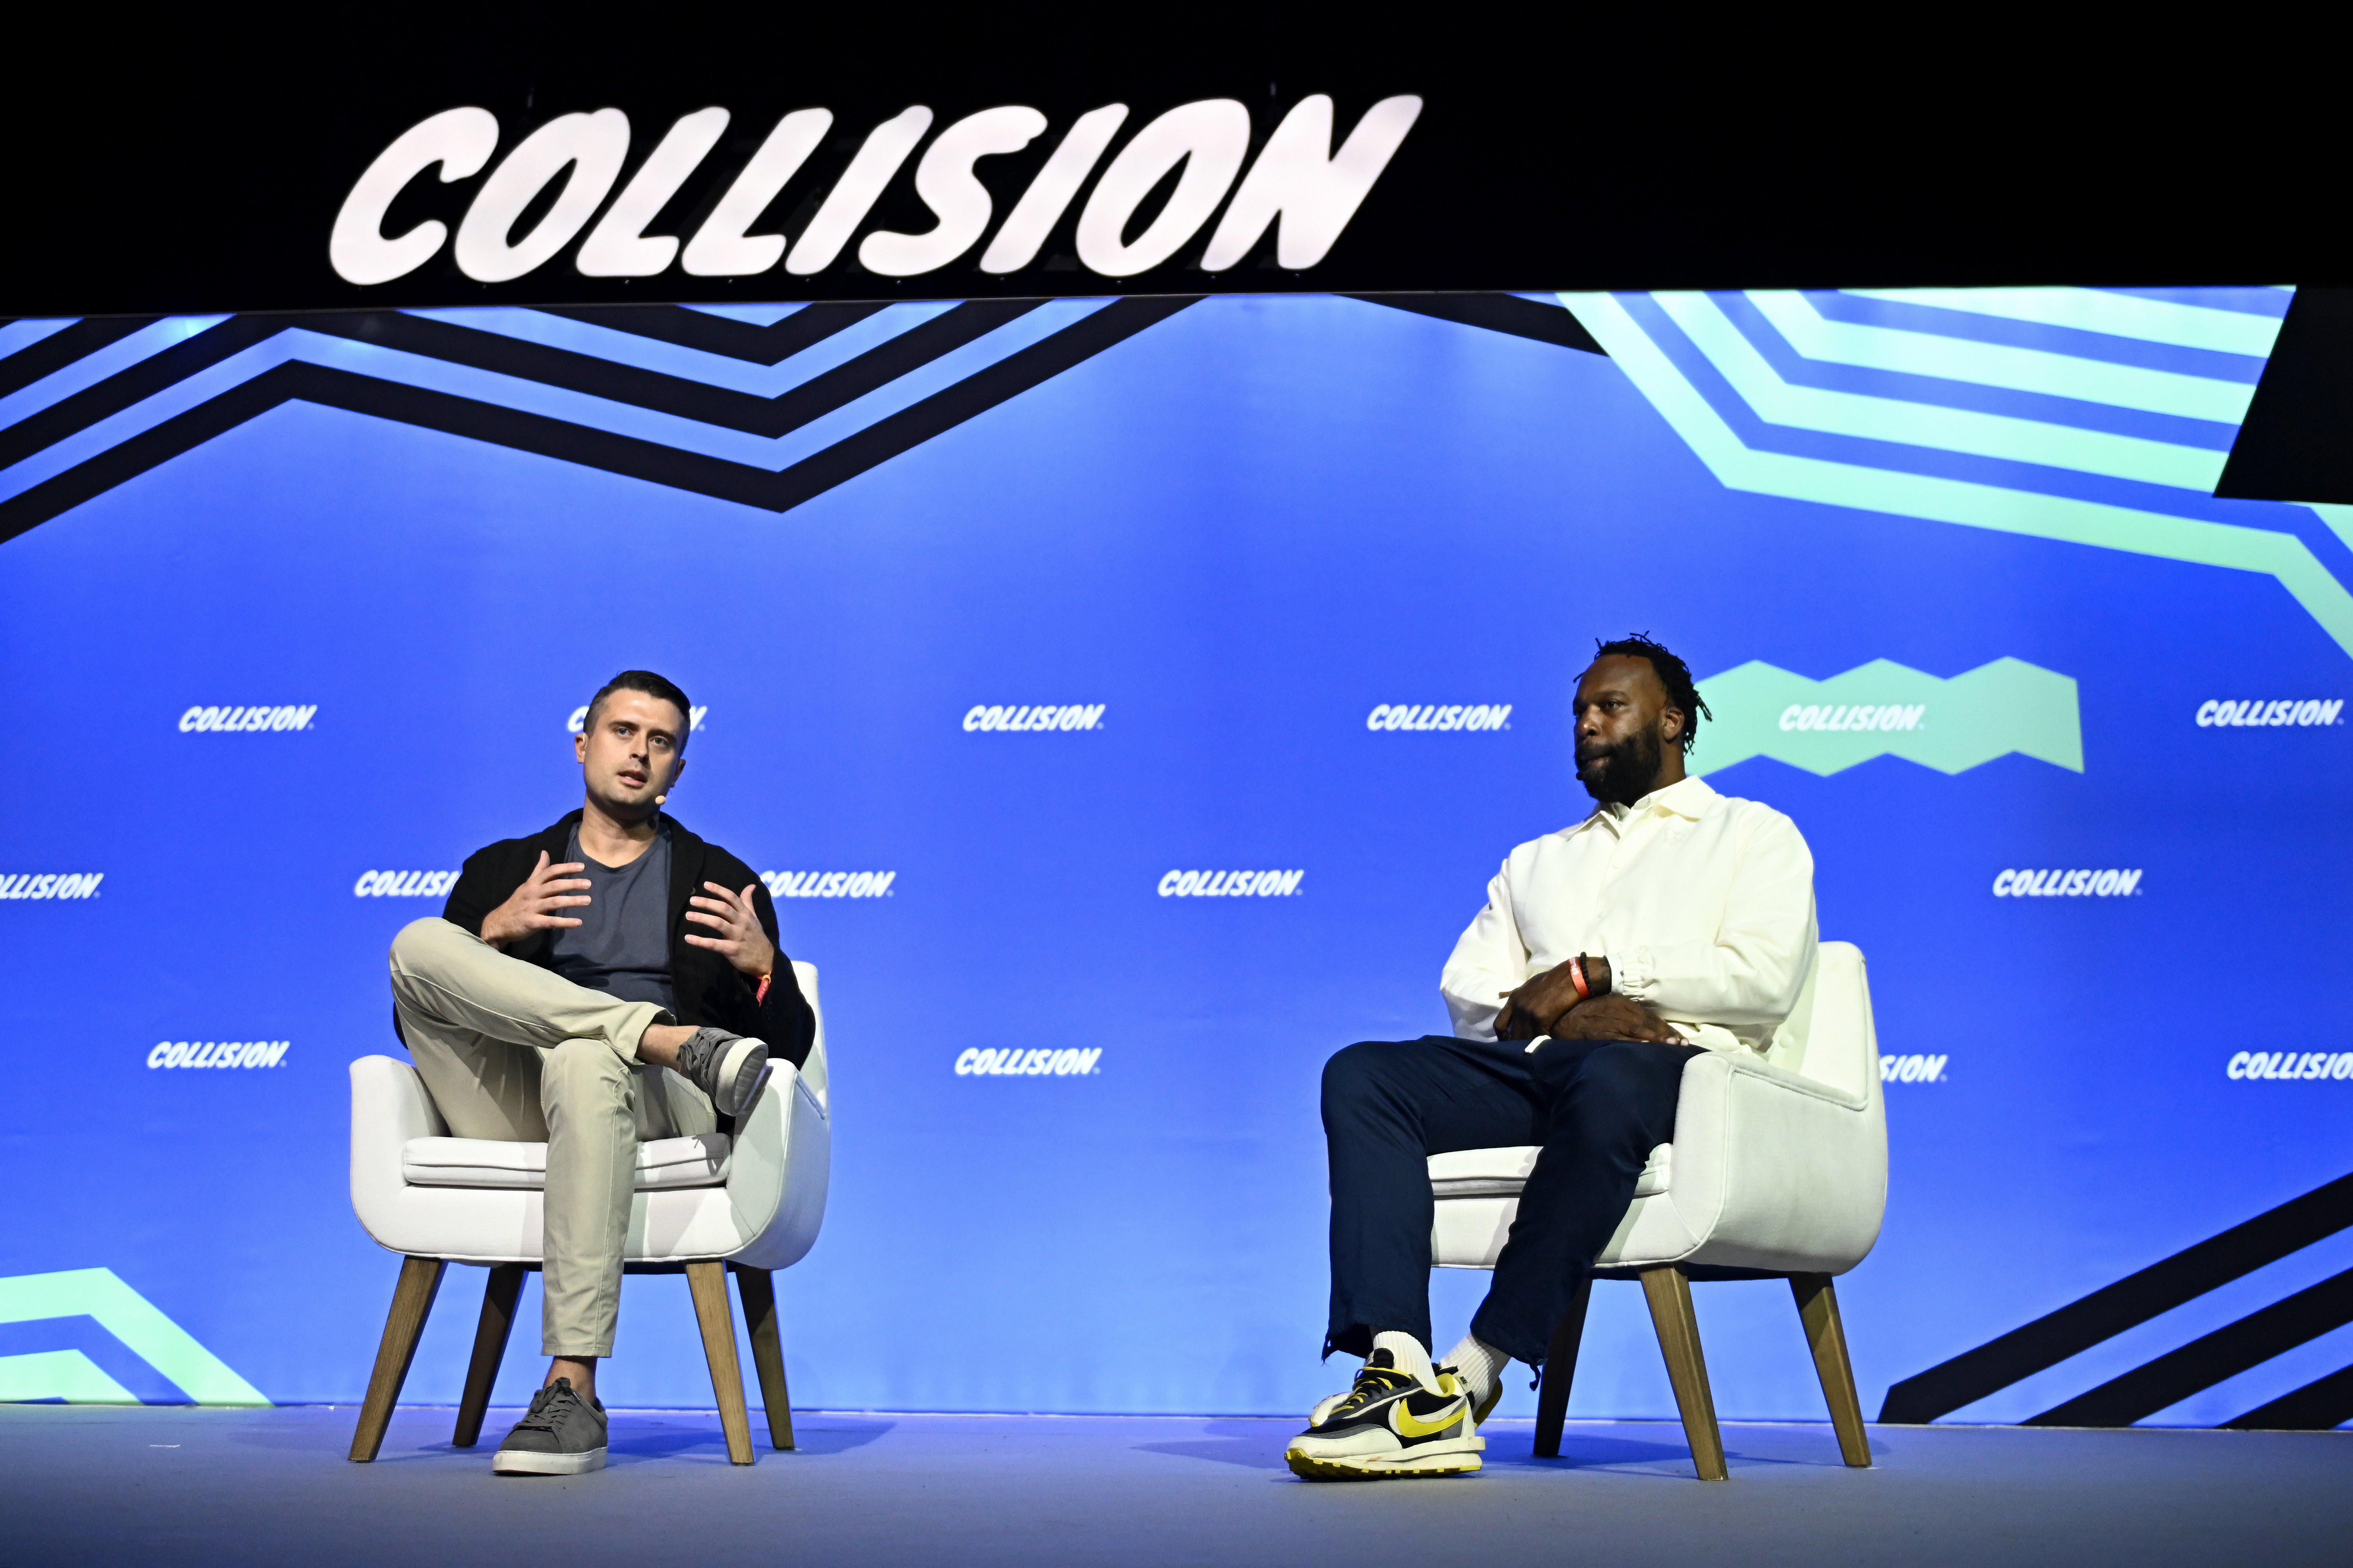 NBA legend, Baron Davis, and Dibbs co-founder and CEO, Evan Vandenberg, on-stage at Collision Conference.